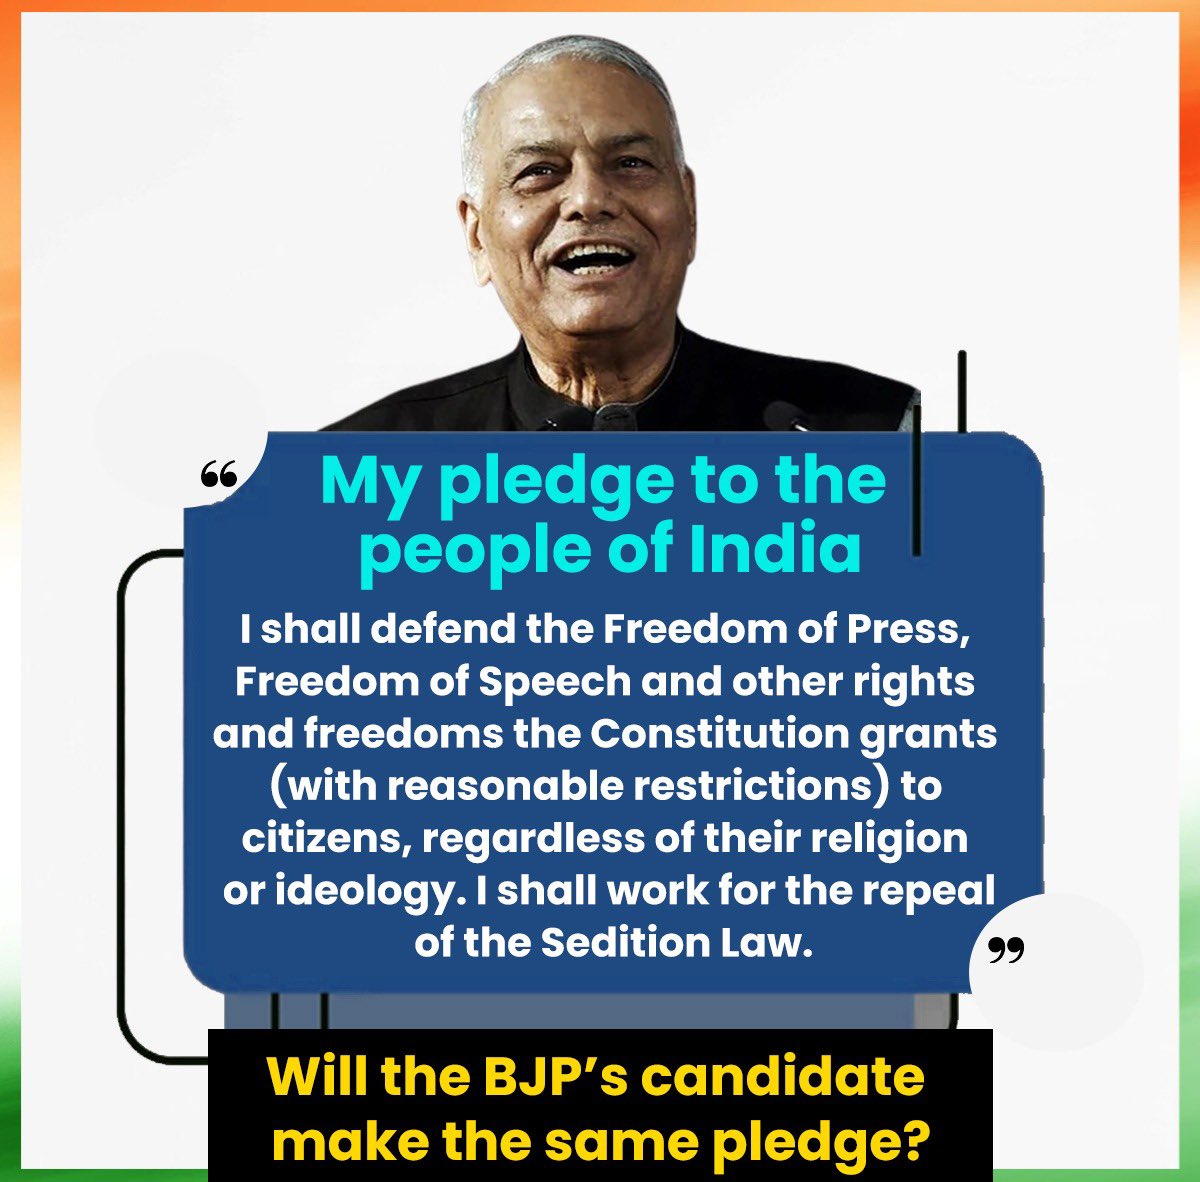 I pledge to the people of India that, upon being elected as President, I will safeguard the rights & freedoms guaranteed by the Constitution to each and every Indian. I urge the BJP’s candidate to make the same pledge.